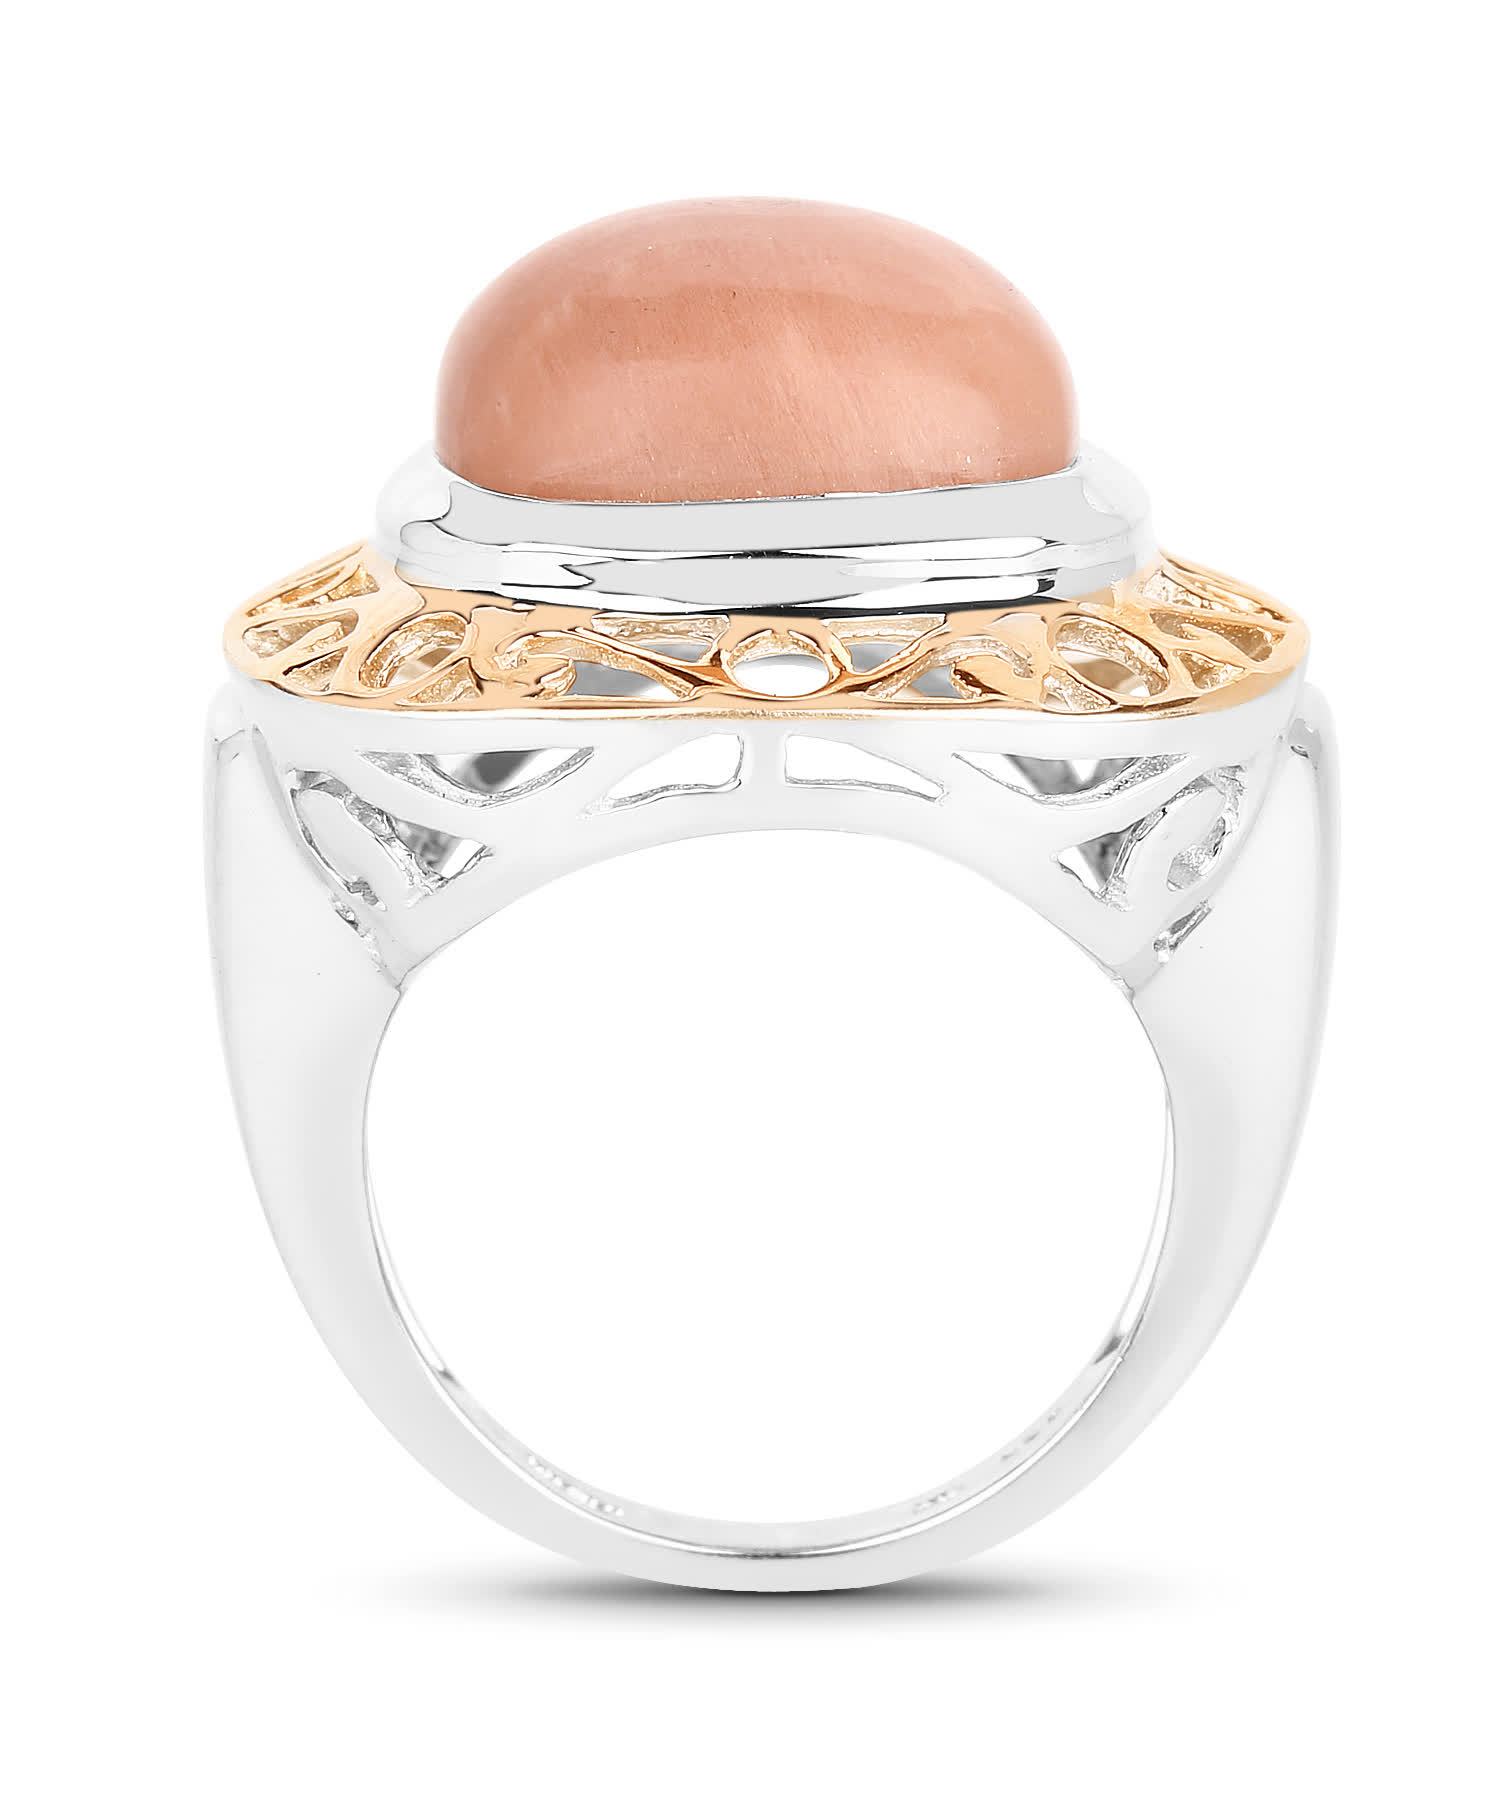 12.80ctw Natural Peach Moonstone Rhodium Plated 925 Sterling Silver Cocktail Ring View 2